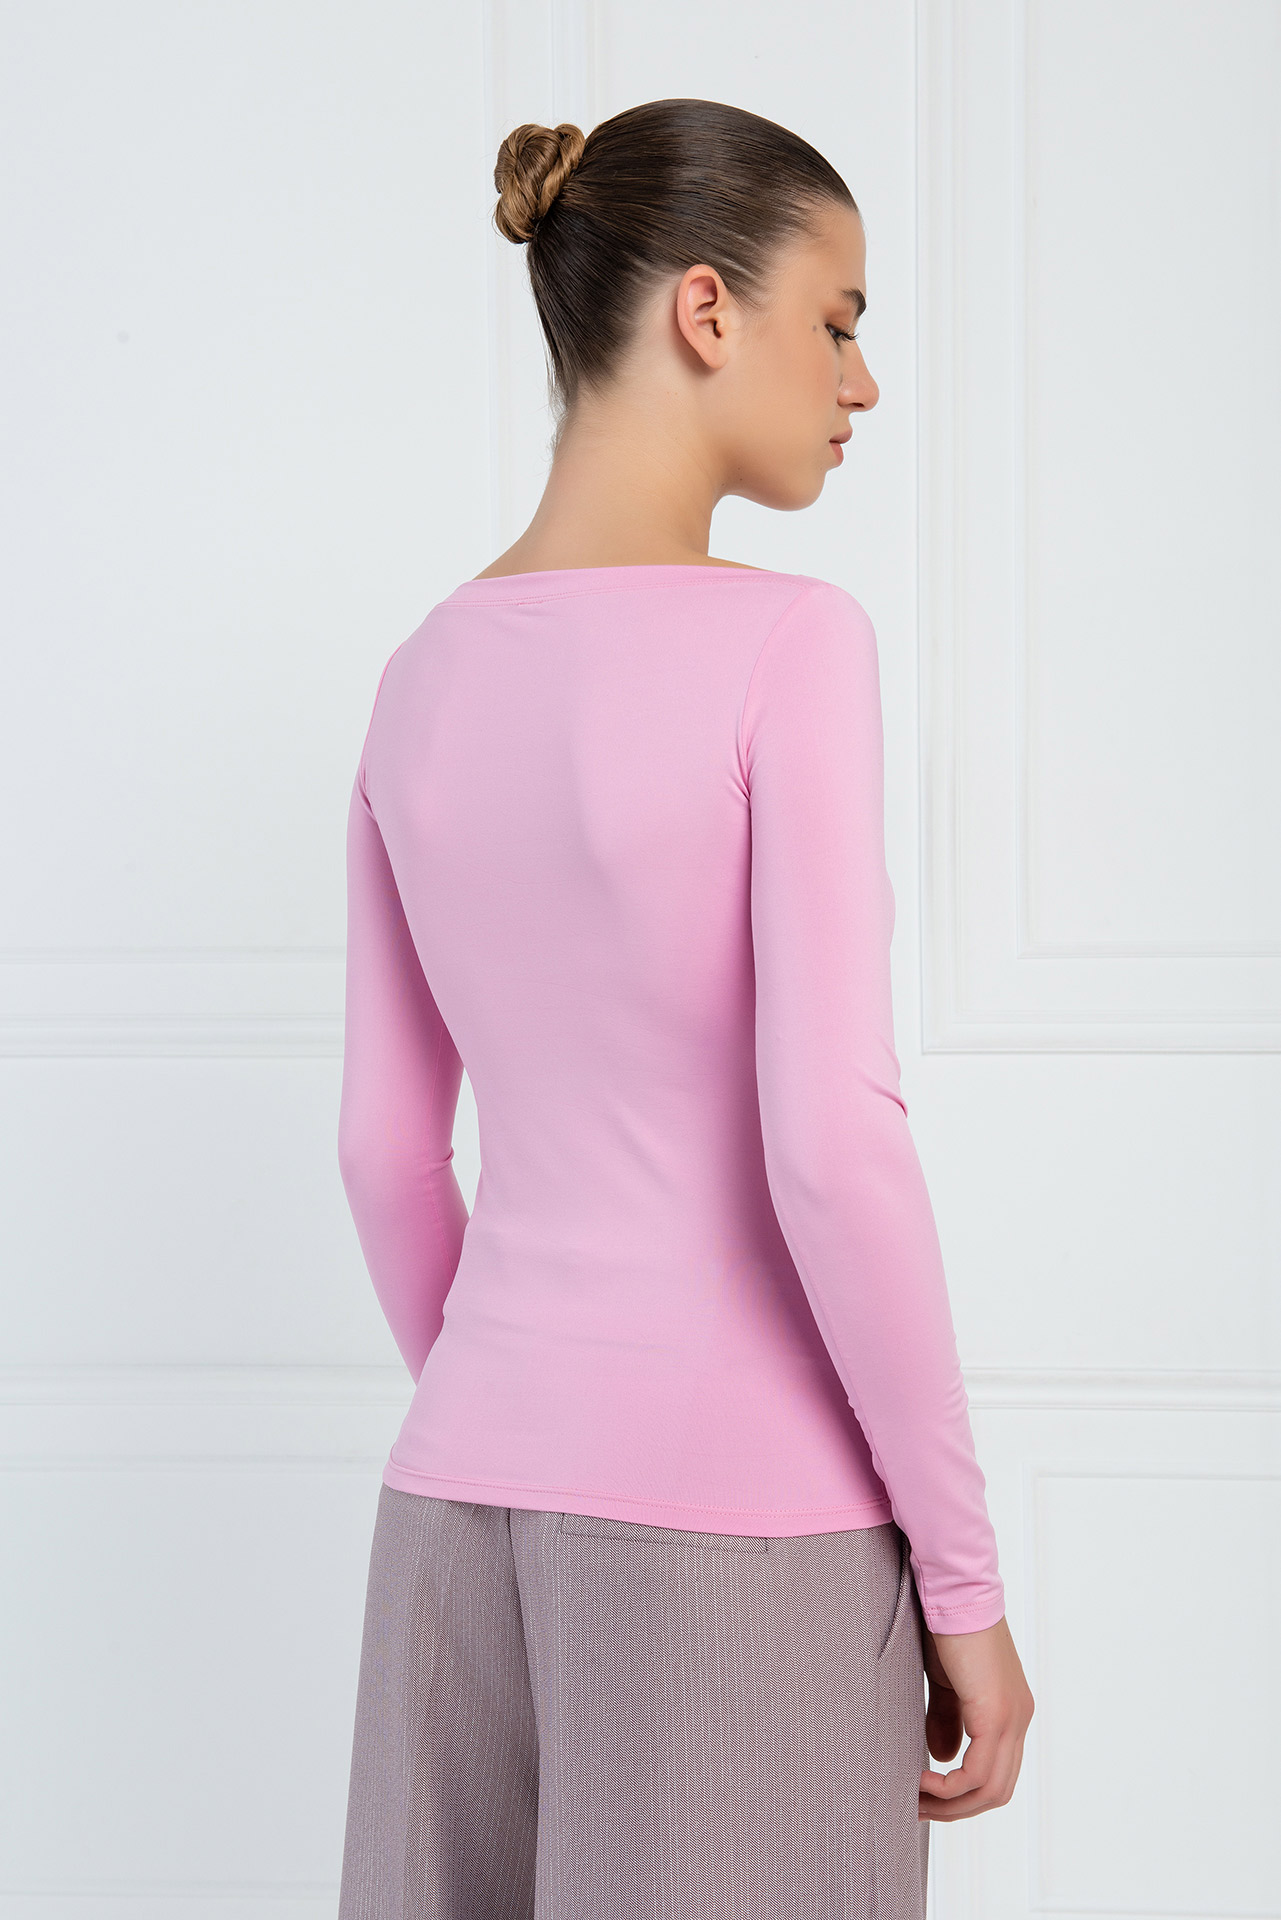 Boat Neck Long Sleeve New Pink Top